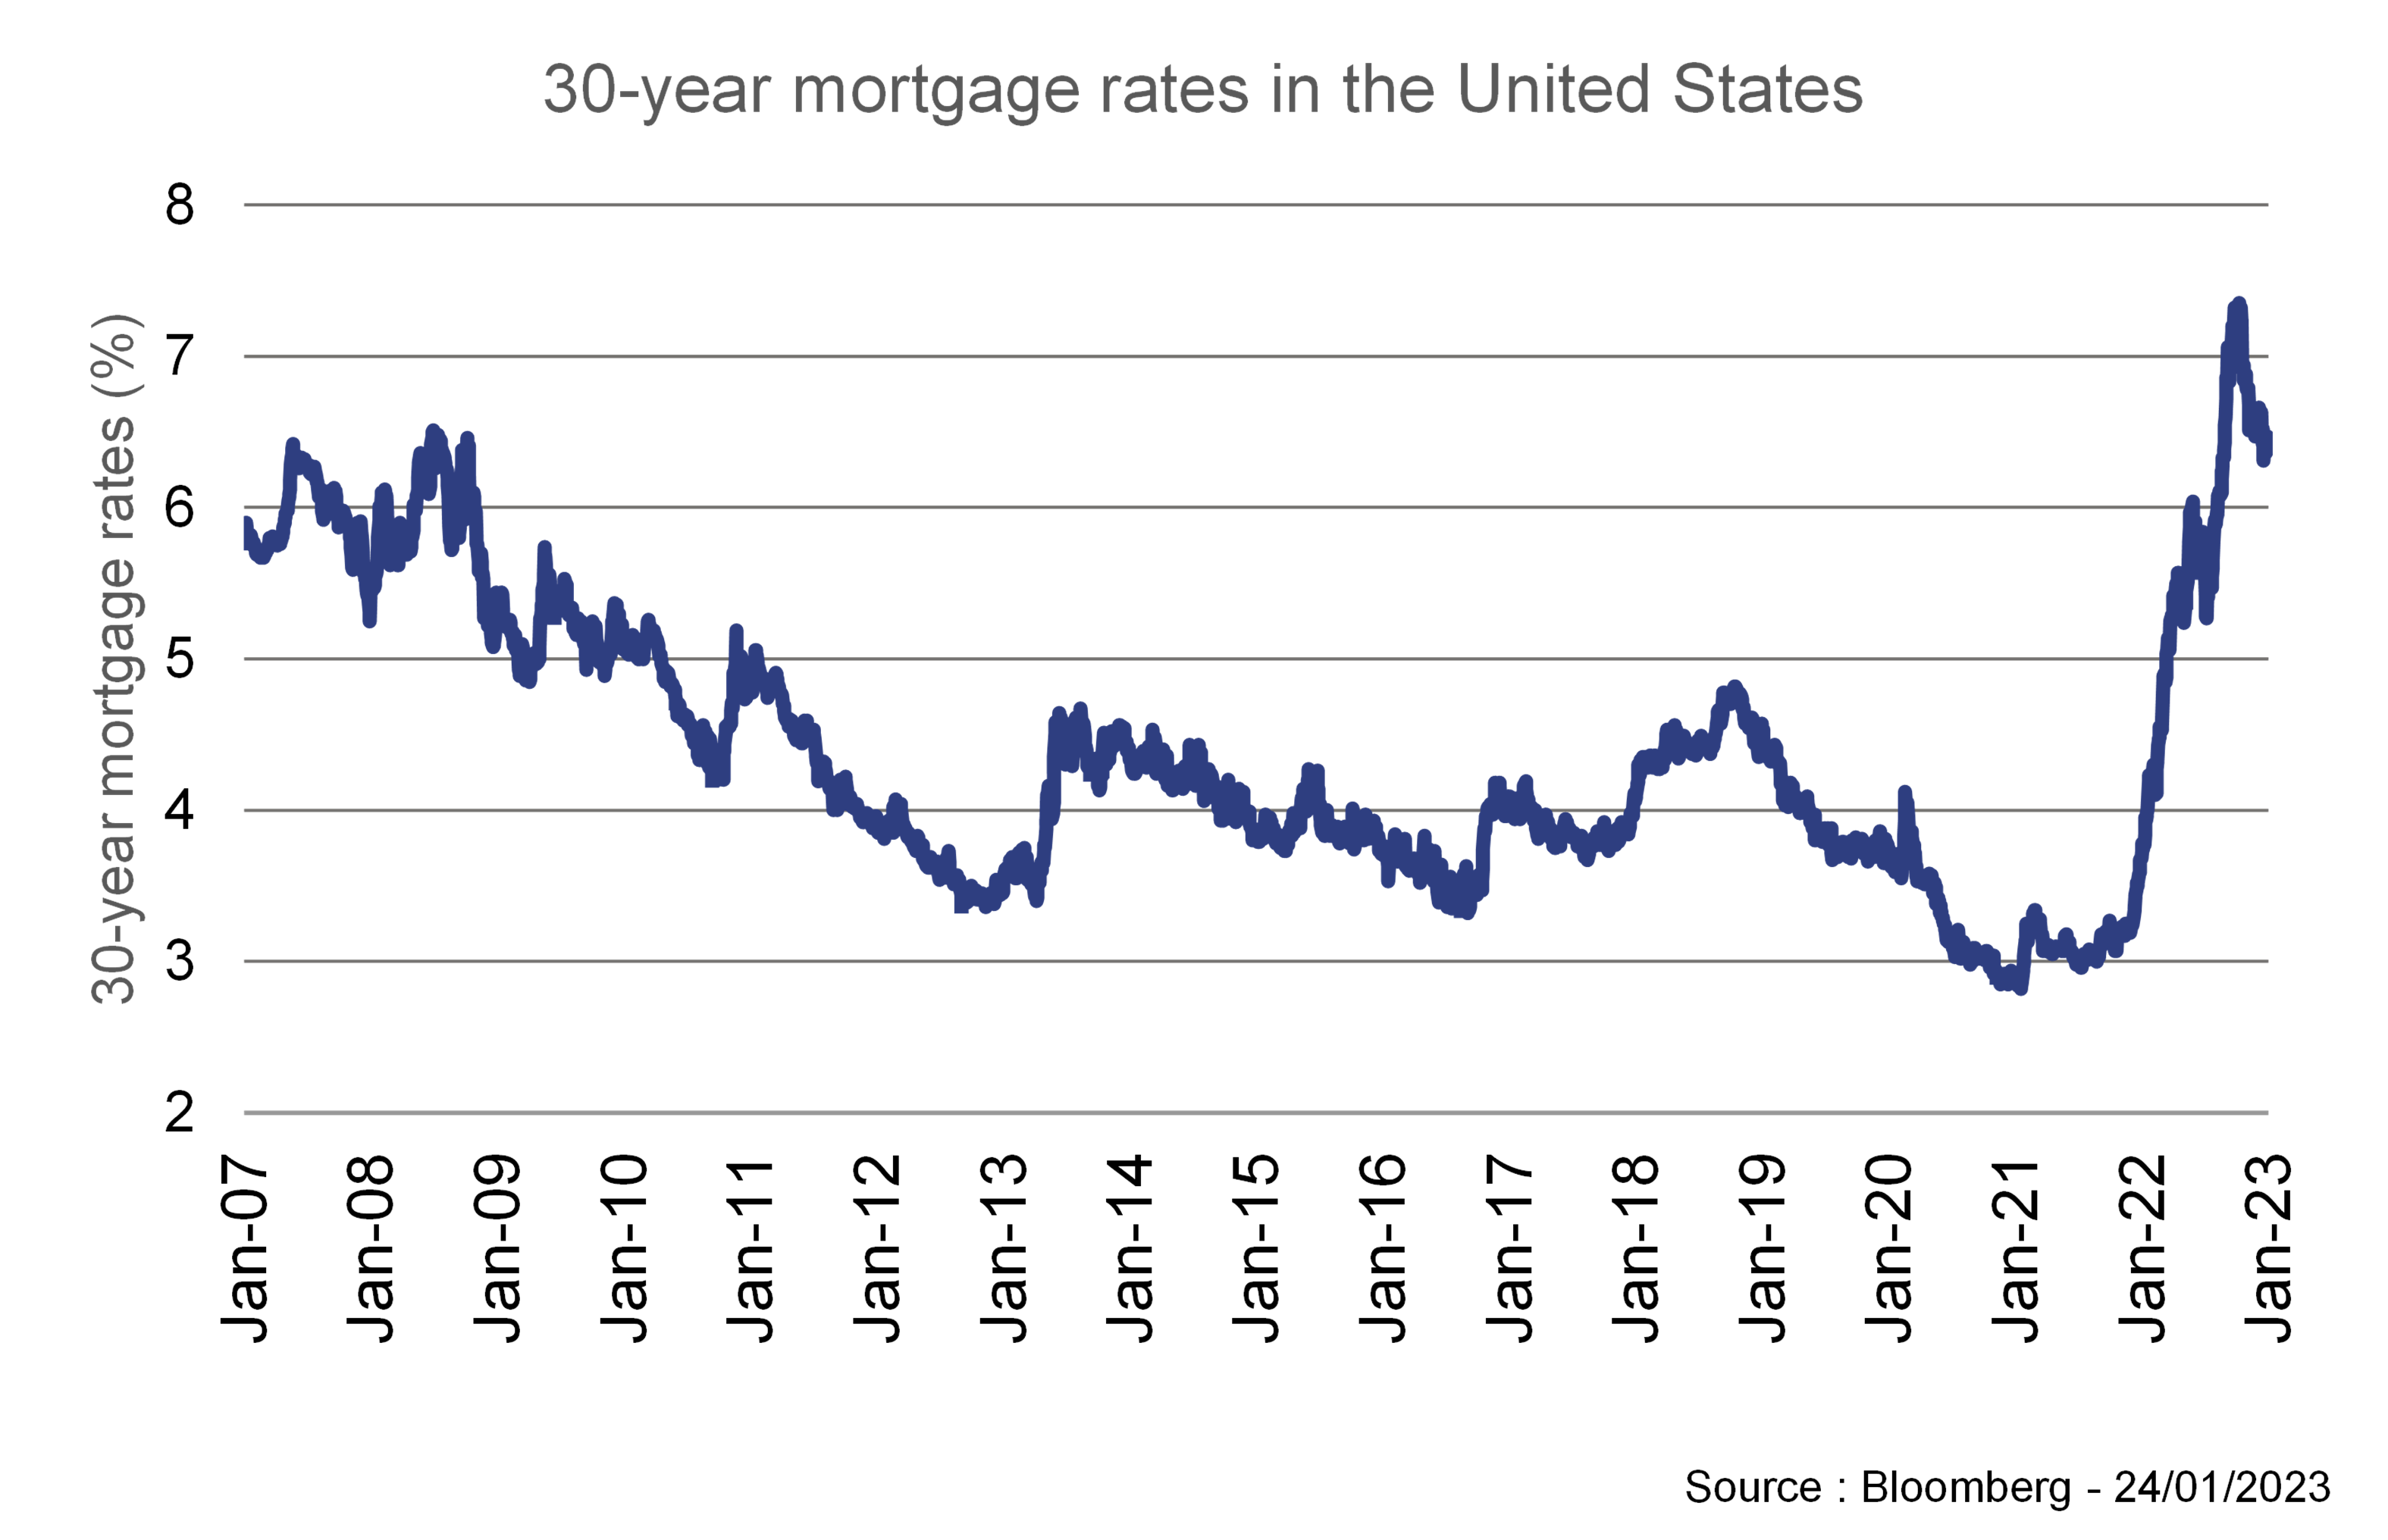 30-year mortgage rates in the United States.png